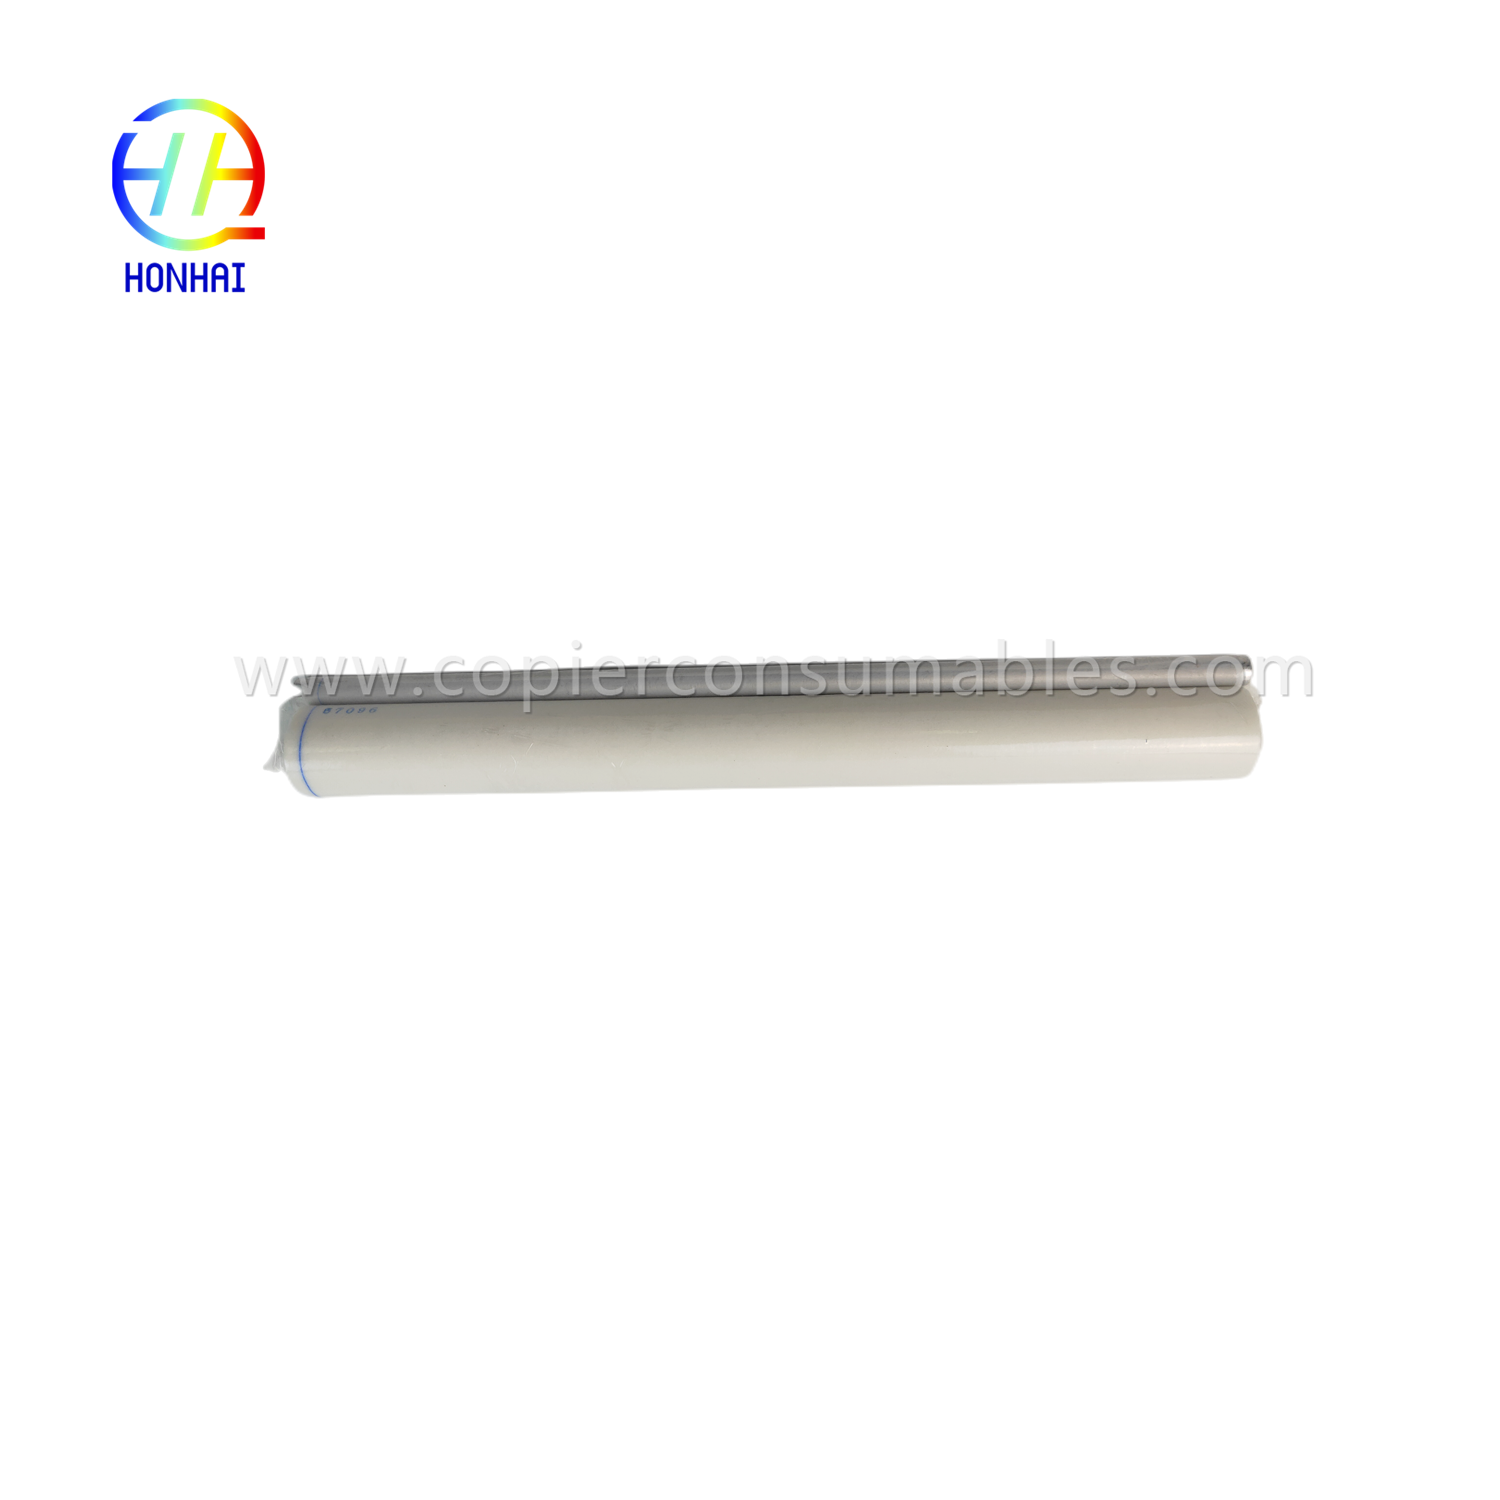 https://www.copierconsumables.com/fuser-cleaning-web-for-canon-ir6800-ir-8085-8095-8105-8205-8285-8295-fq-009-fc5-2286-000-oem-fuser- táirge glantacháin-fuser-roller/